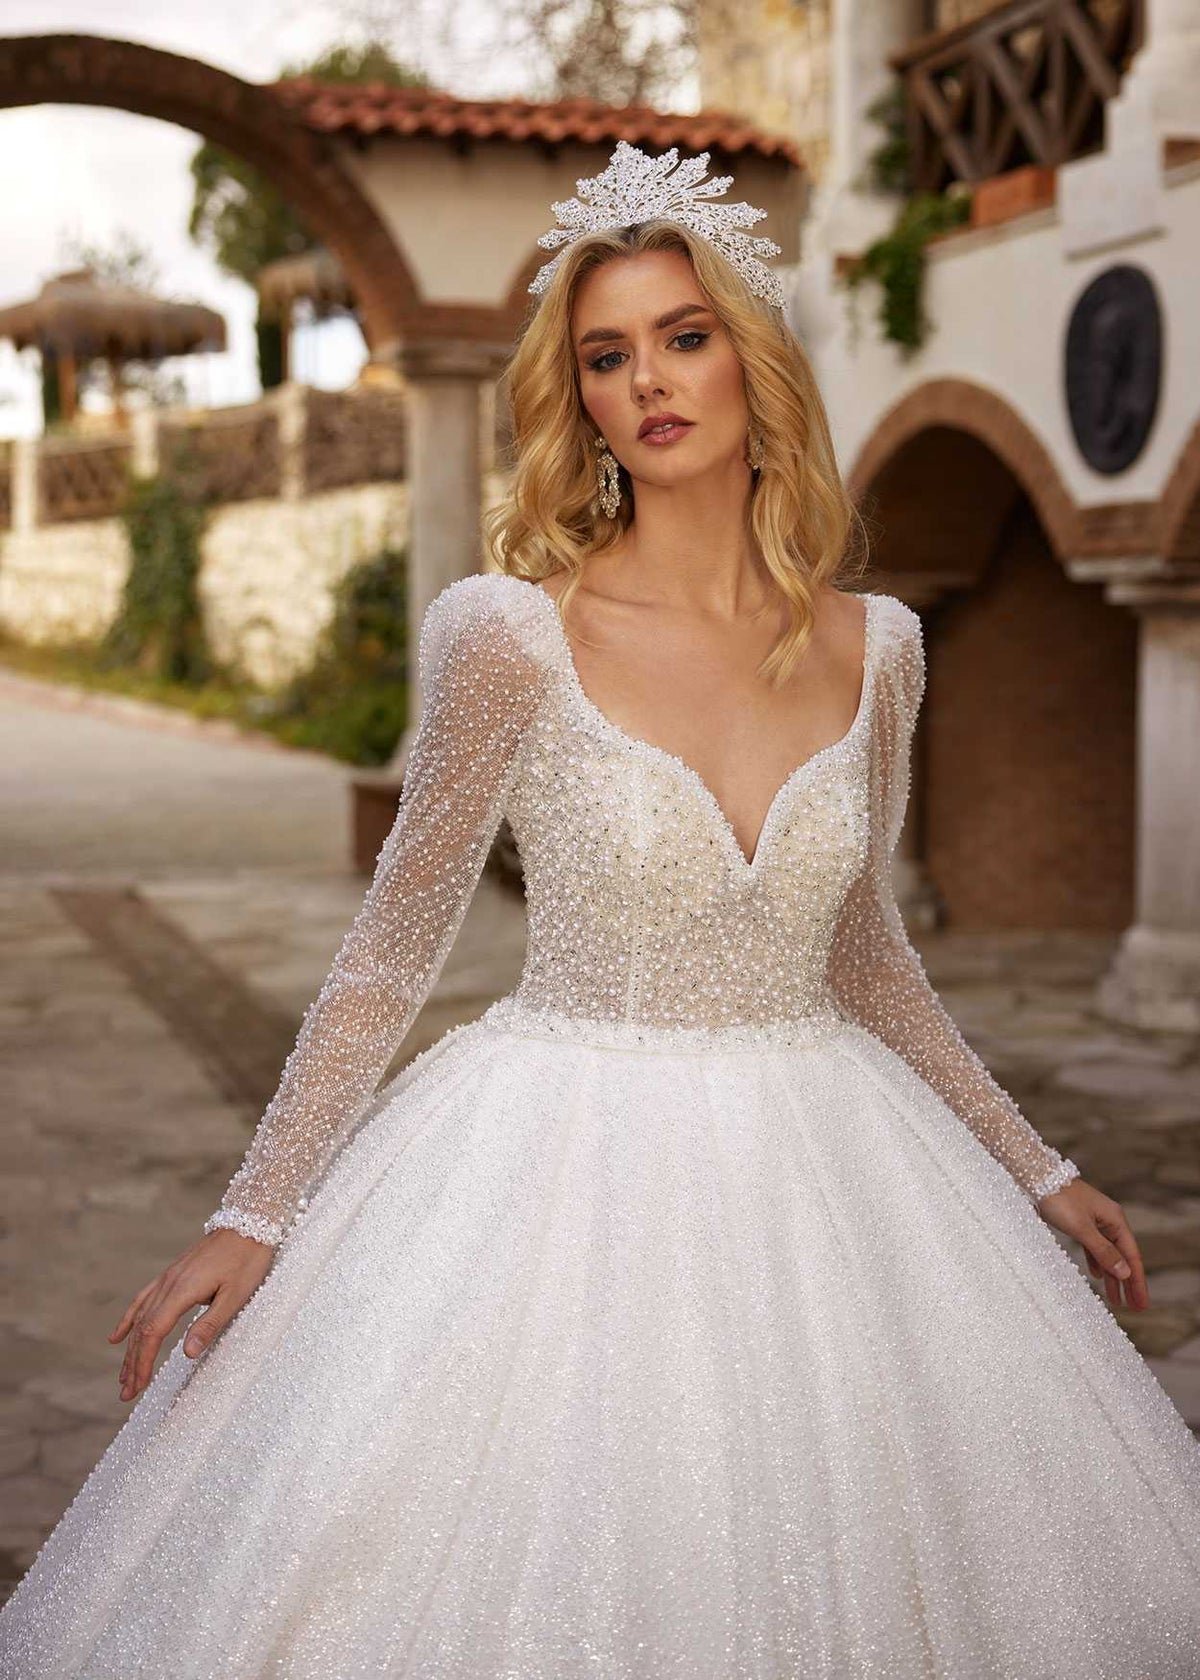 Buy Classic And Elegant Pearl Beaded A line Train Wedding Dress With Sheer Sleeves plus sizes discounted online wedding stores